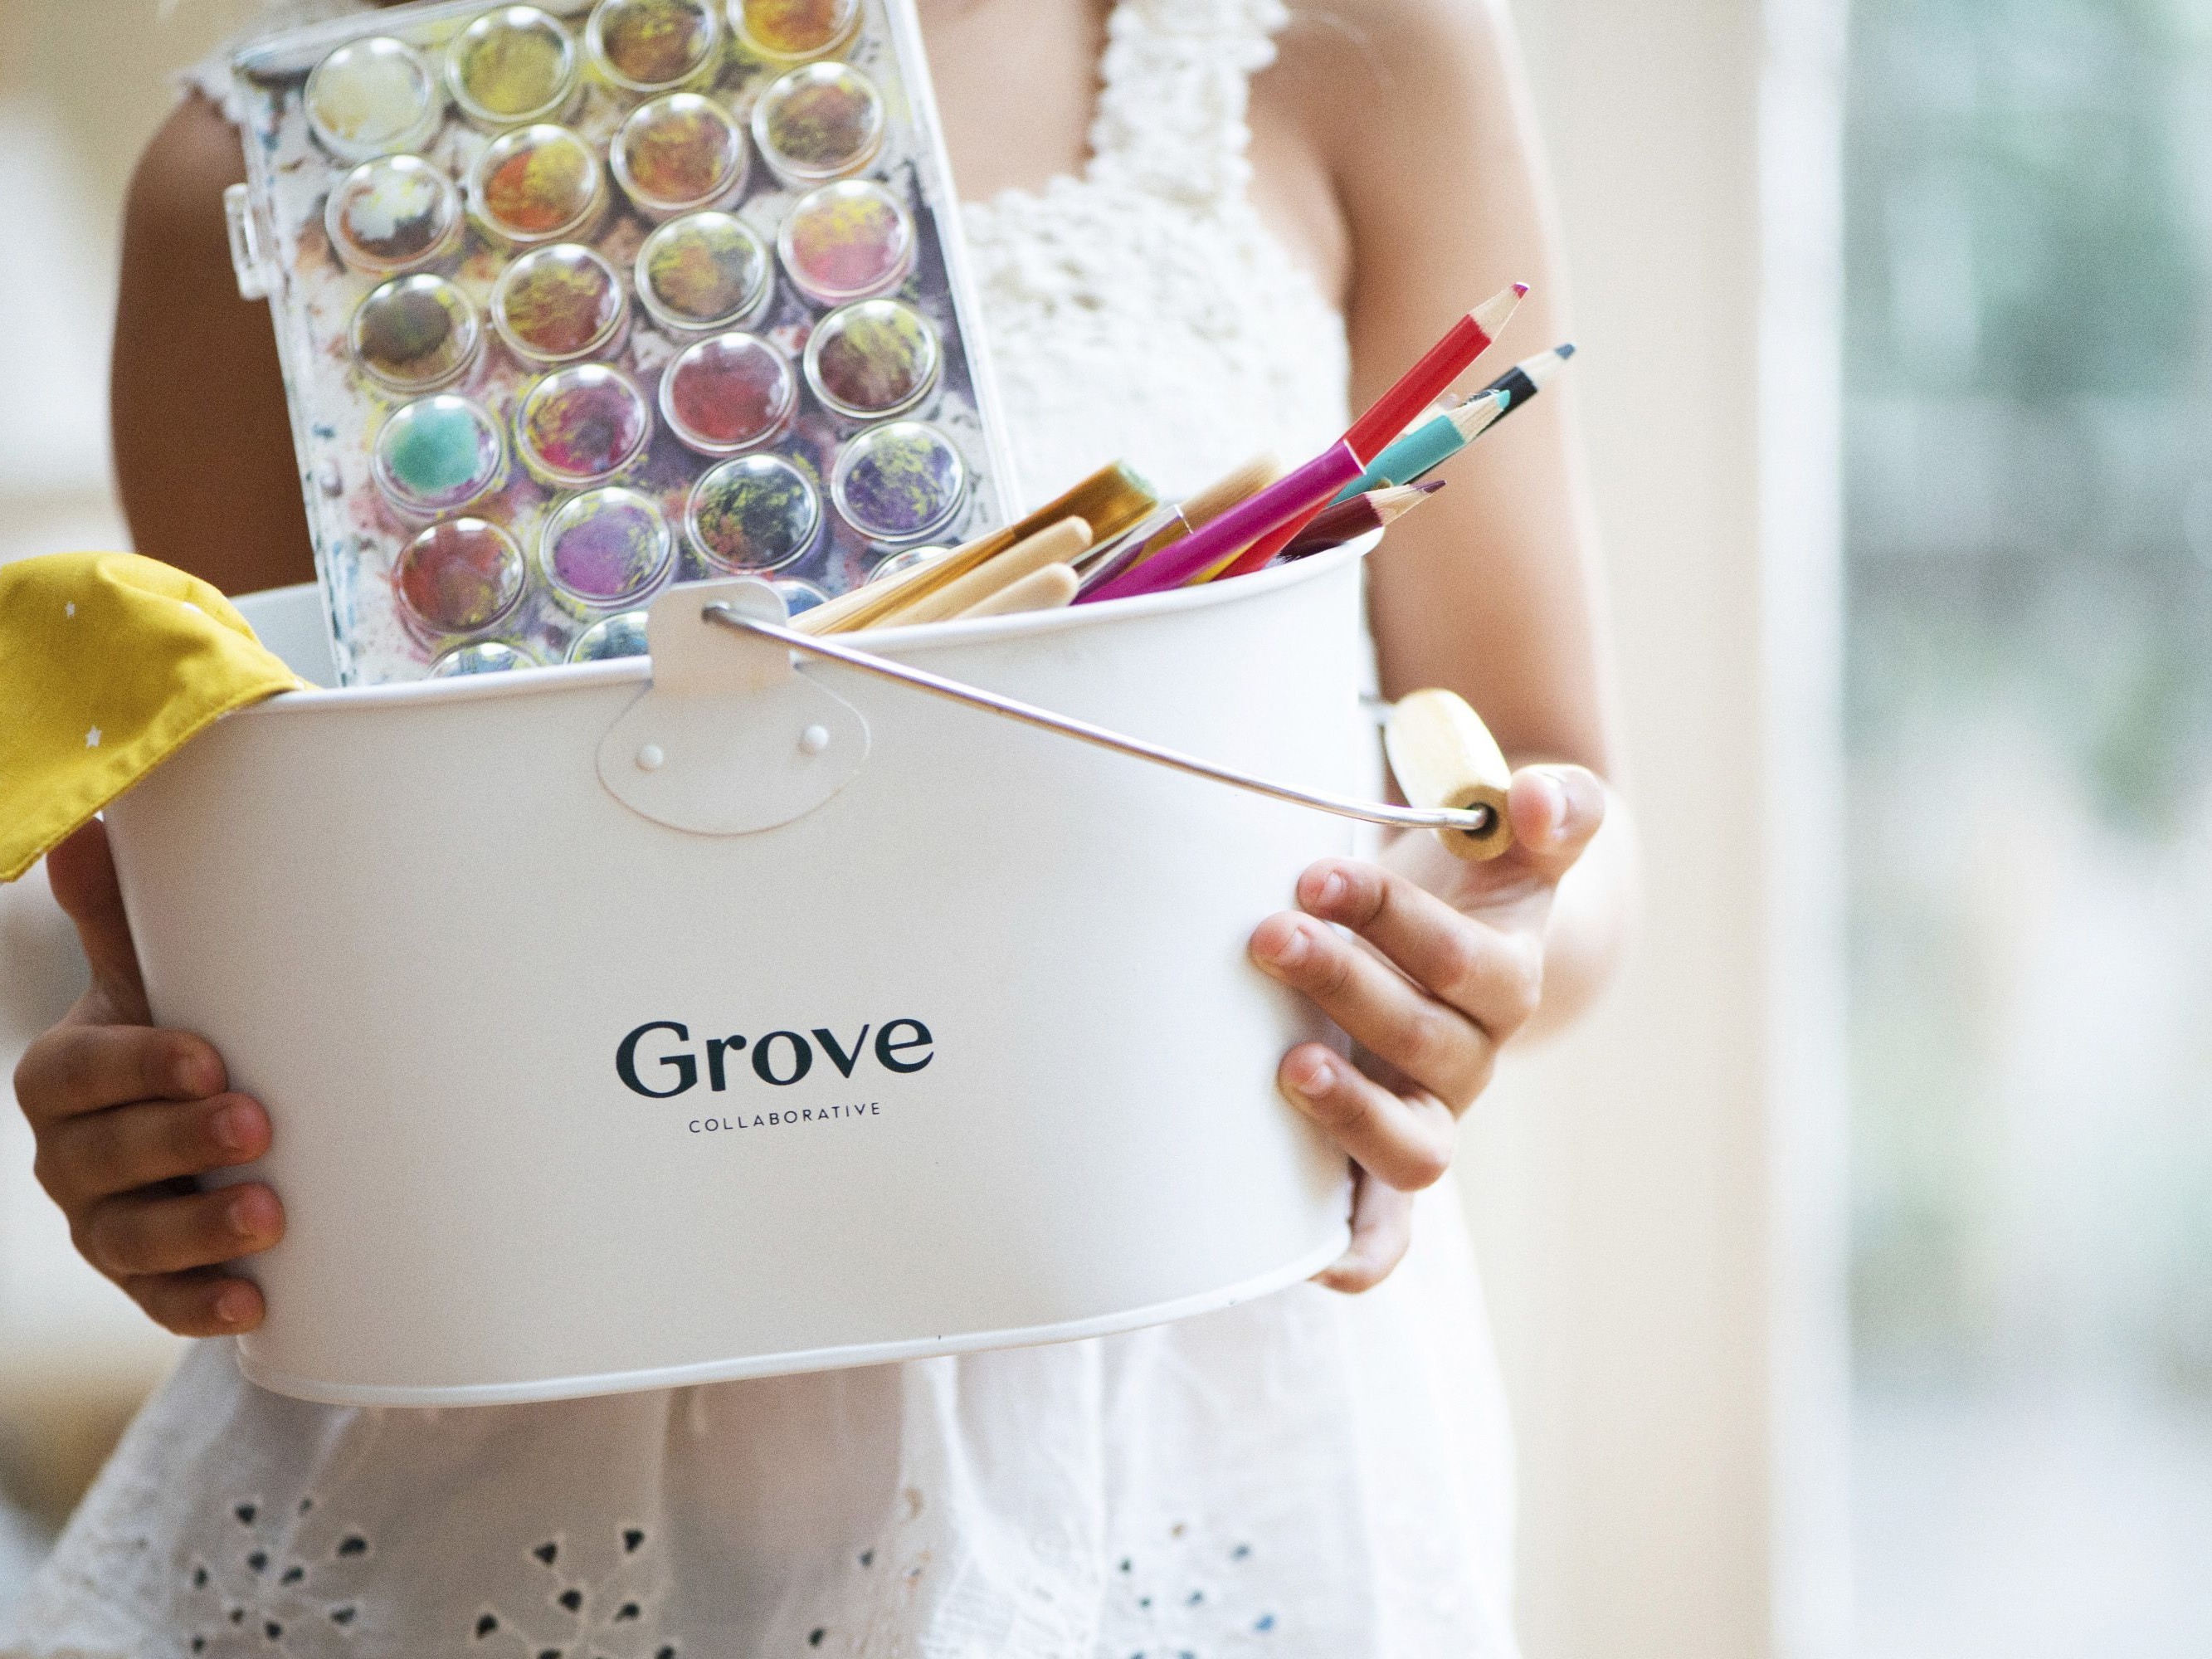 person holding Grove caddy with ink and coloring supplies